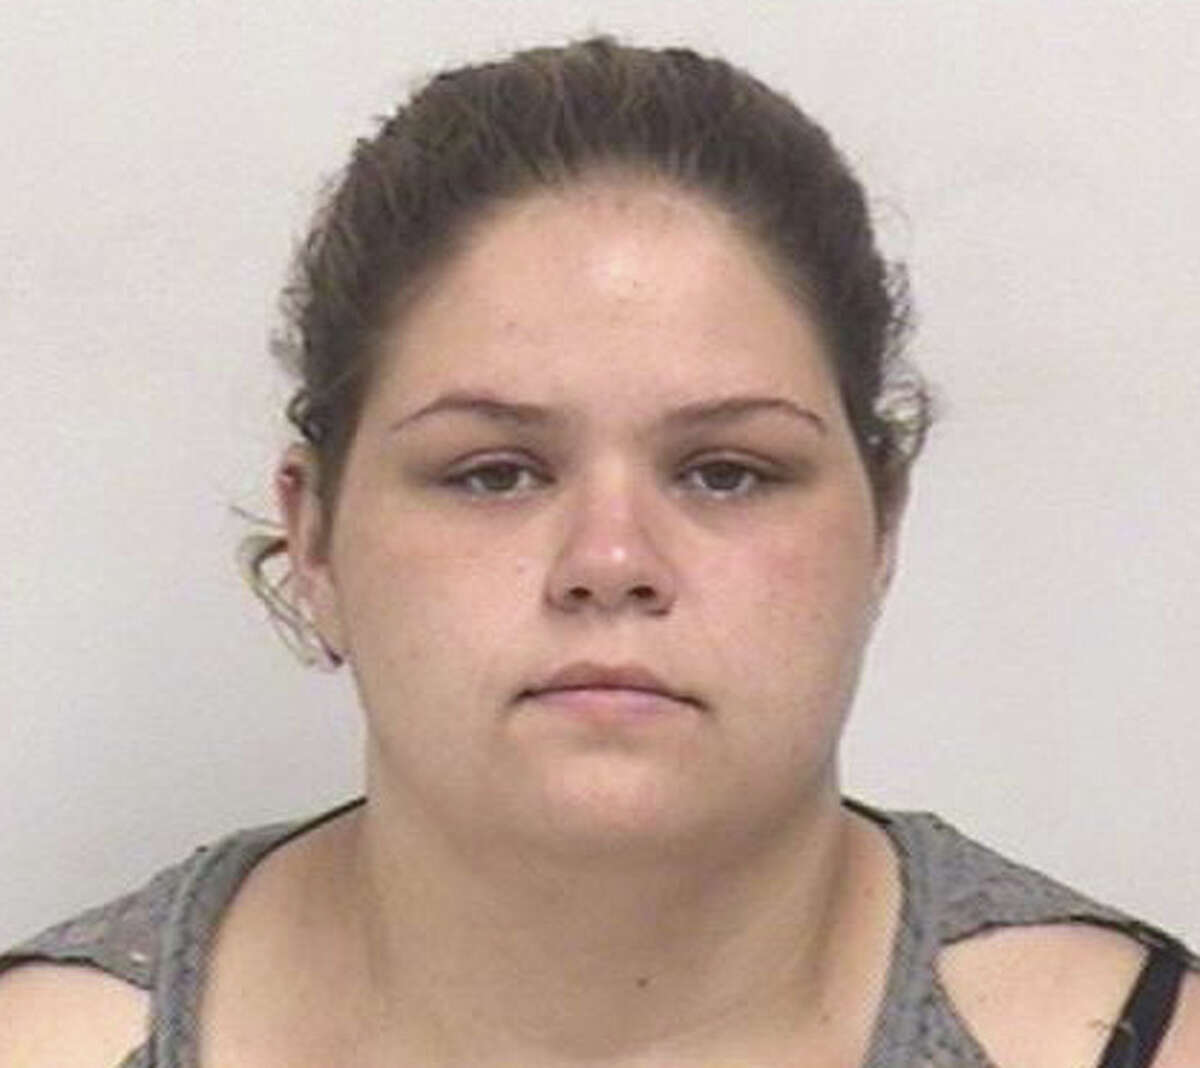 Candace M. Zulawski, 22, of West Haven was charged Wednesday in connection with illegally trying to withdraw funds from a Westport bank account.